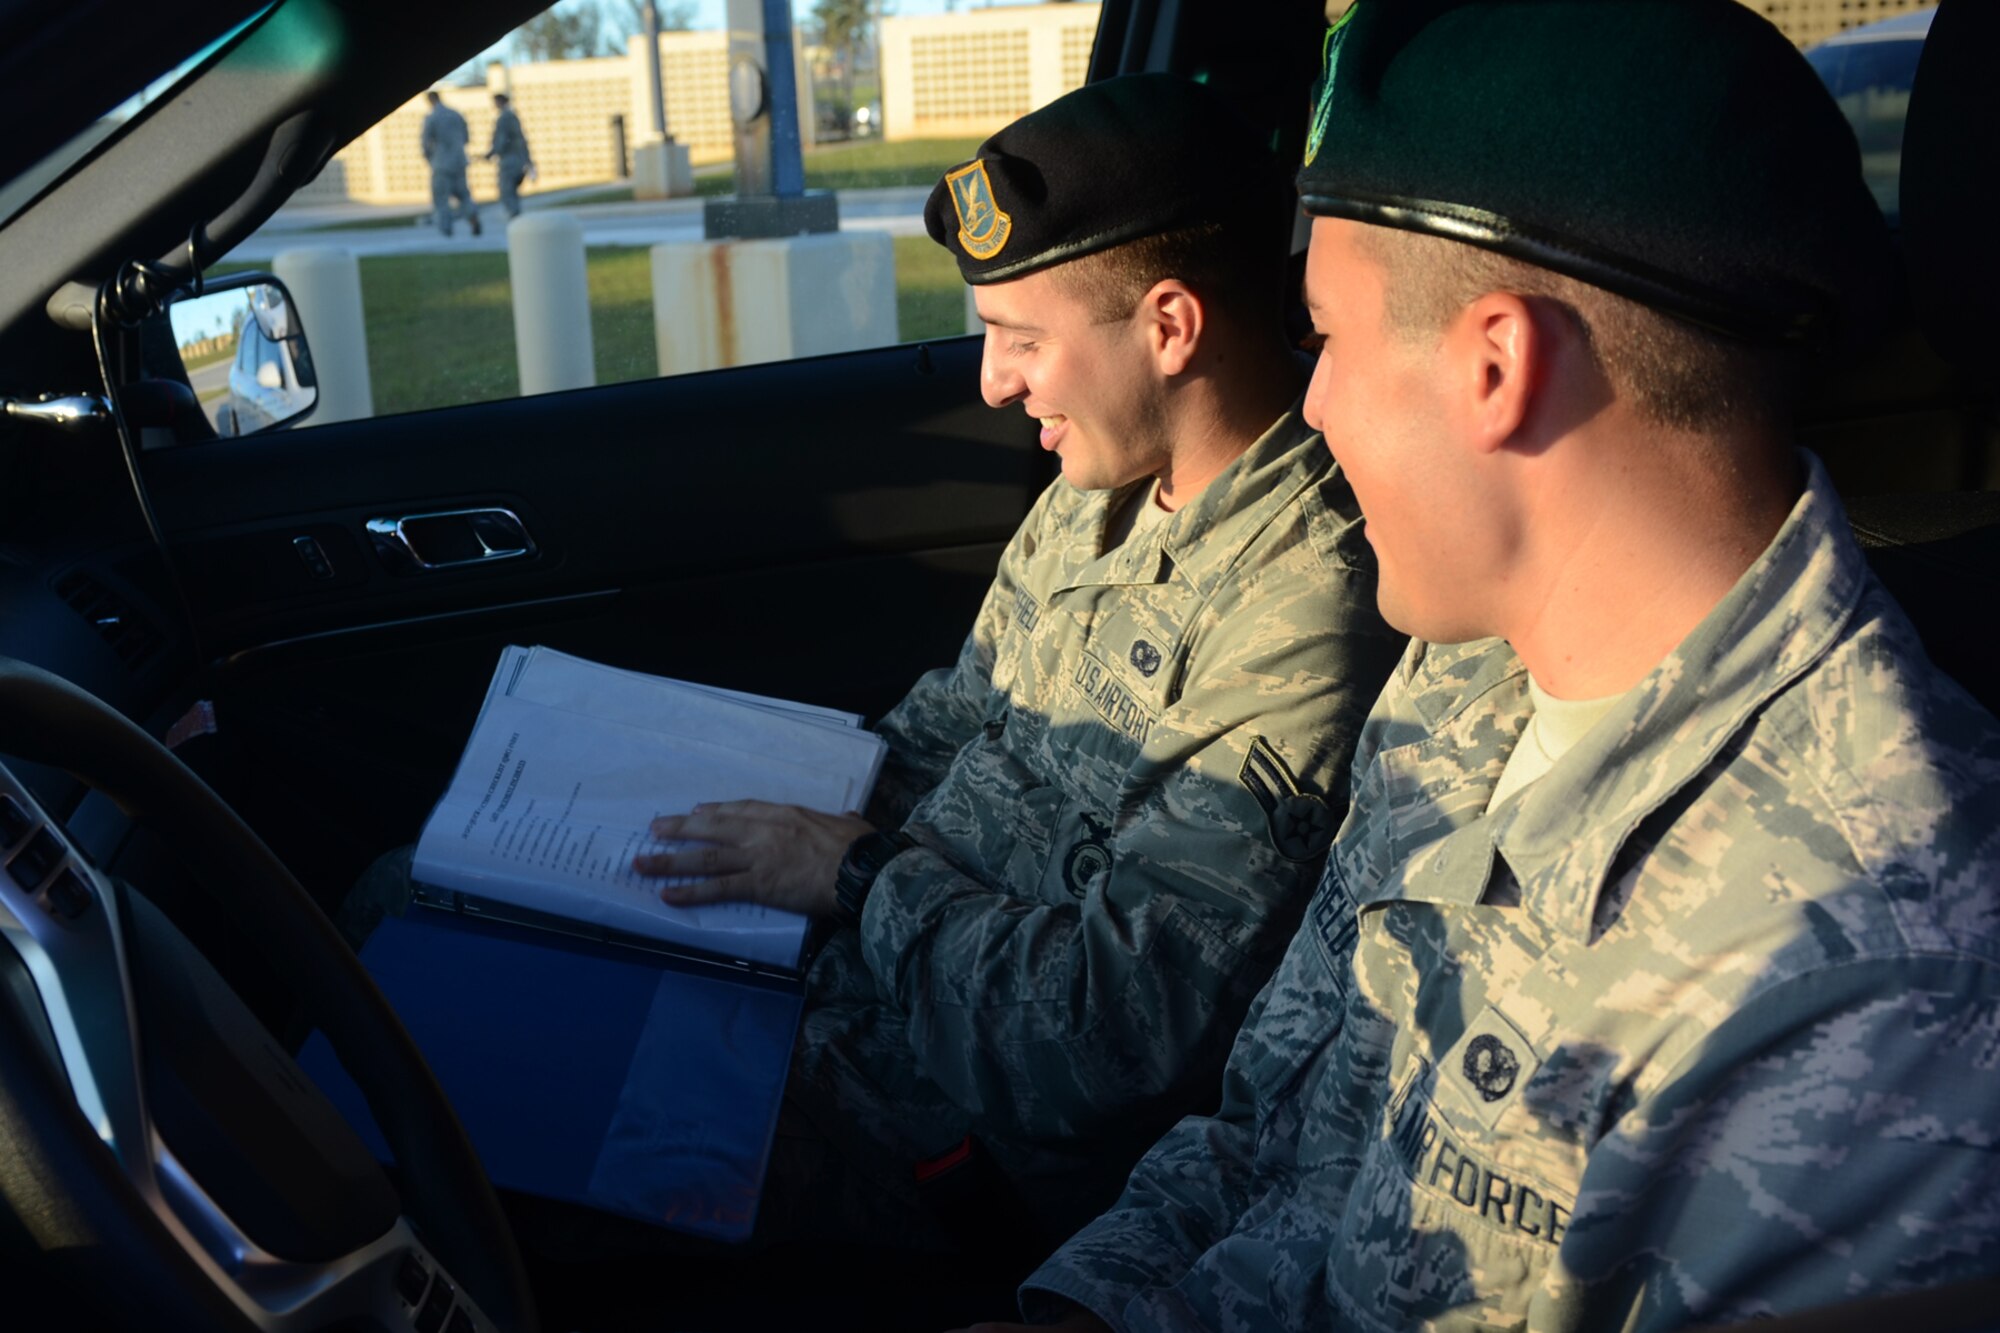 U.S. Air Force Airmen 1st Class Travis (left) and Colby Wakefield, 36th Security Forces Squadron entry controllers, prepare for a shift together July 29, 2015, at Andersen Air Force Base, Guam. While they are brothers in arms who serve together, they are also fraternal twins who have worked together since entering the Air Force in October 2013. (U.S. Air Force photo by Airman 1st Class Alexa Ann Henderson/Released)